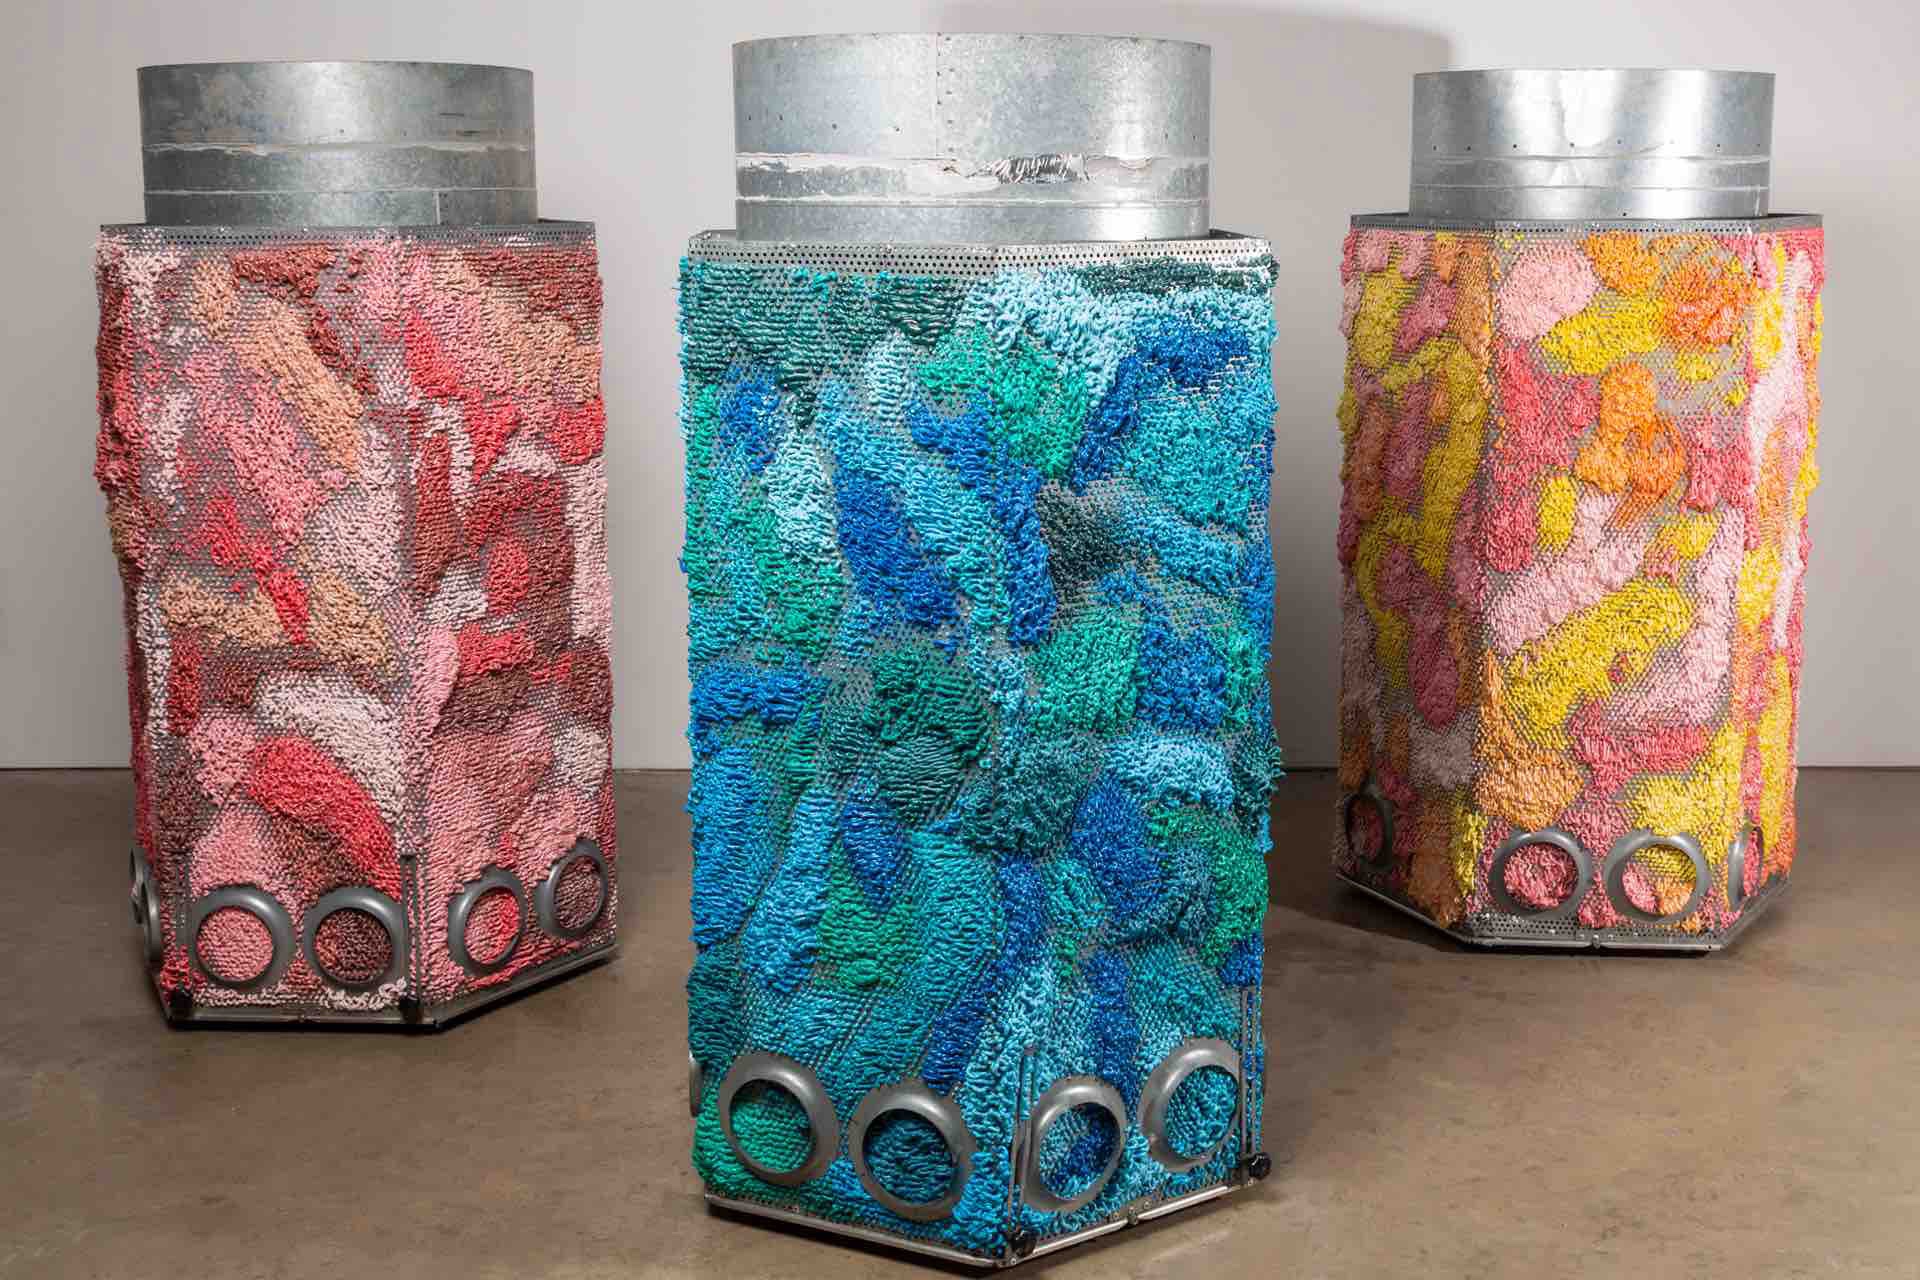 ‘Obfuscated’ is the embodiment of societal, mechanical, and bodily flaws, each cylinder refers to a stage of bodily grief, distance and eventual renewal.